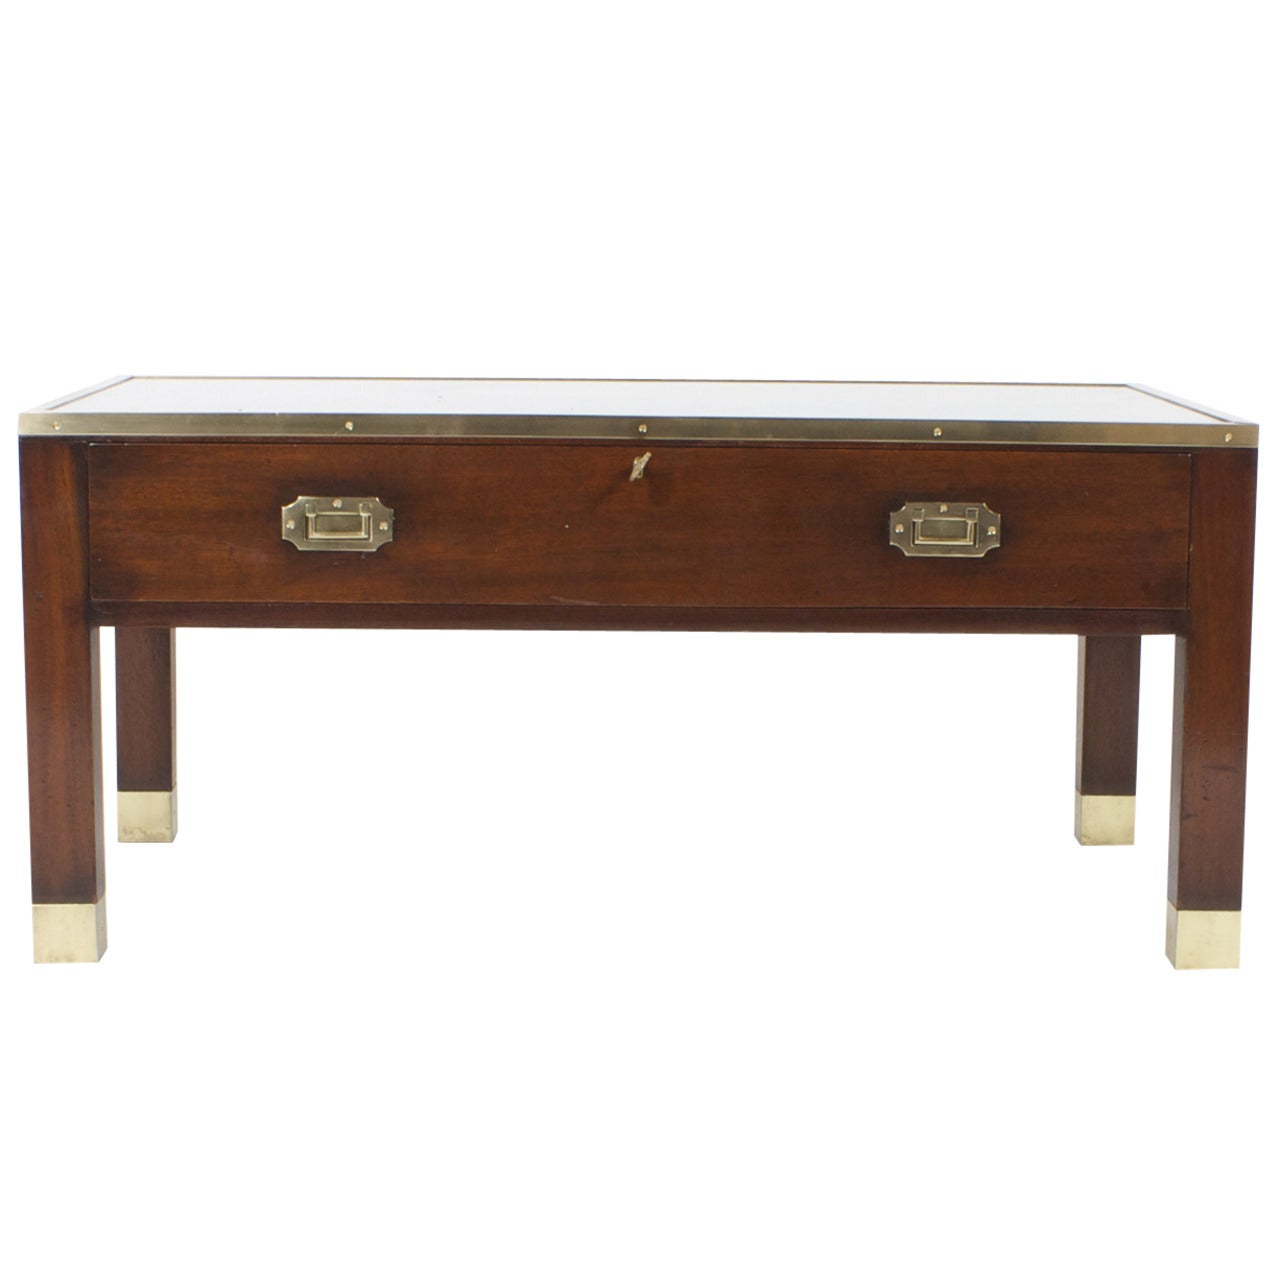 Campaign Style Cocktail or Coffee Table with Display Case